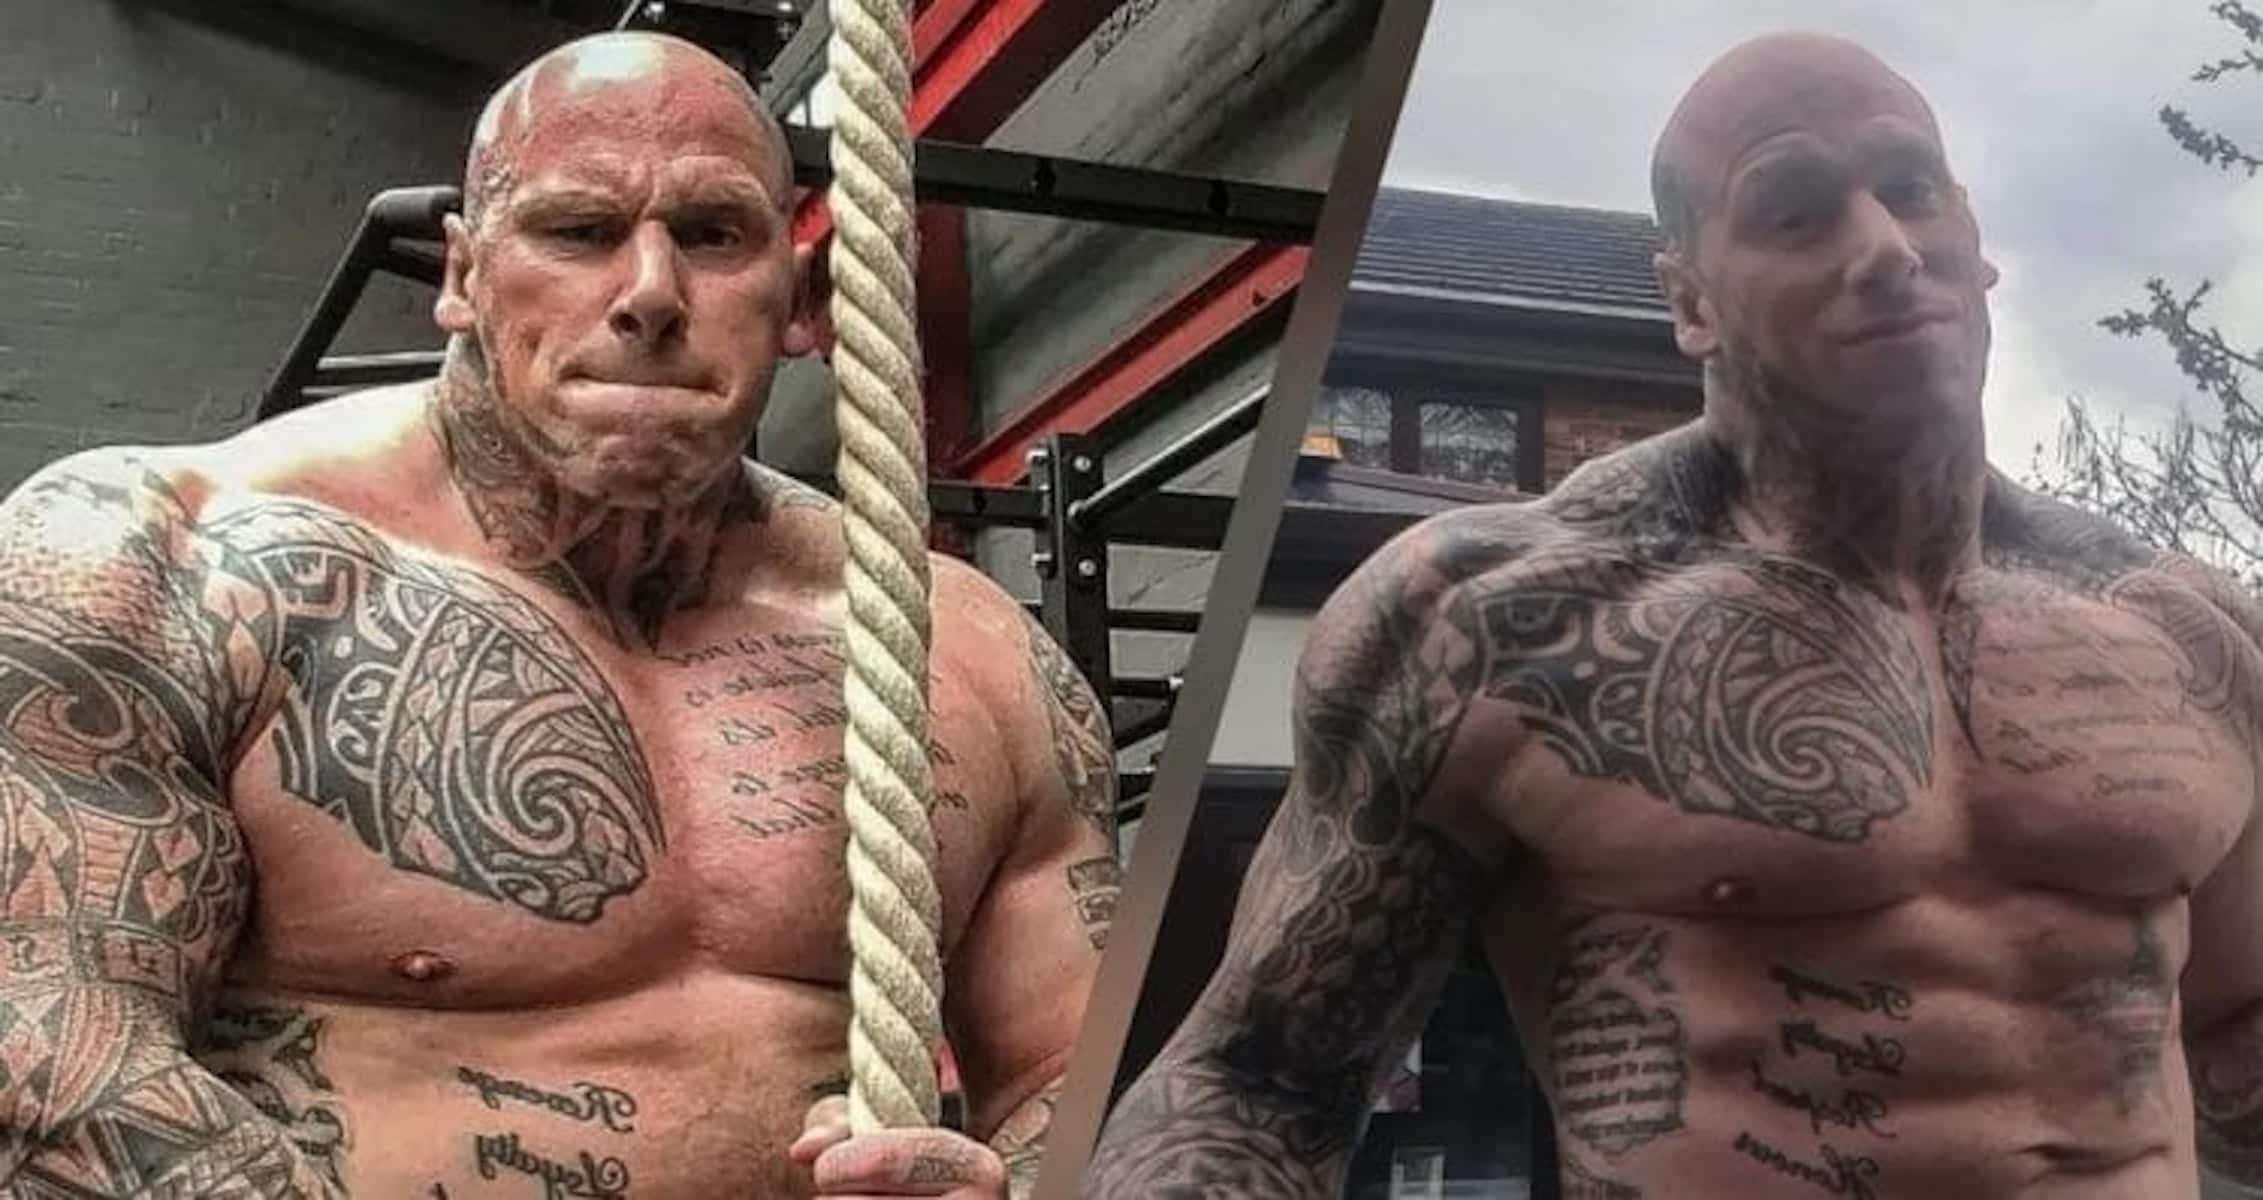 Martyn Ford Down 58 Pounds Since Boxing Training Began: ‘Getting Back To Feeling 21 Again’